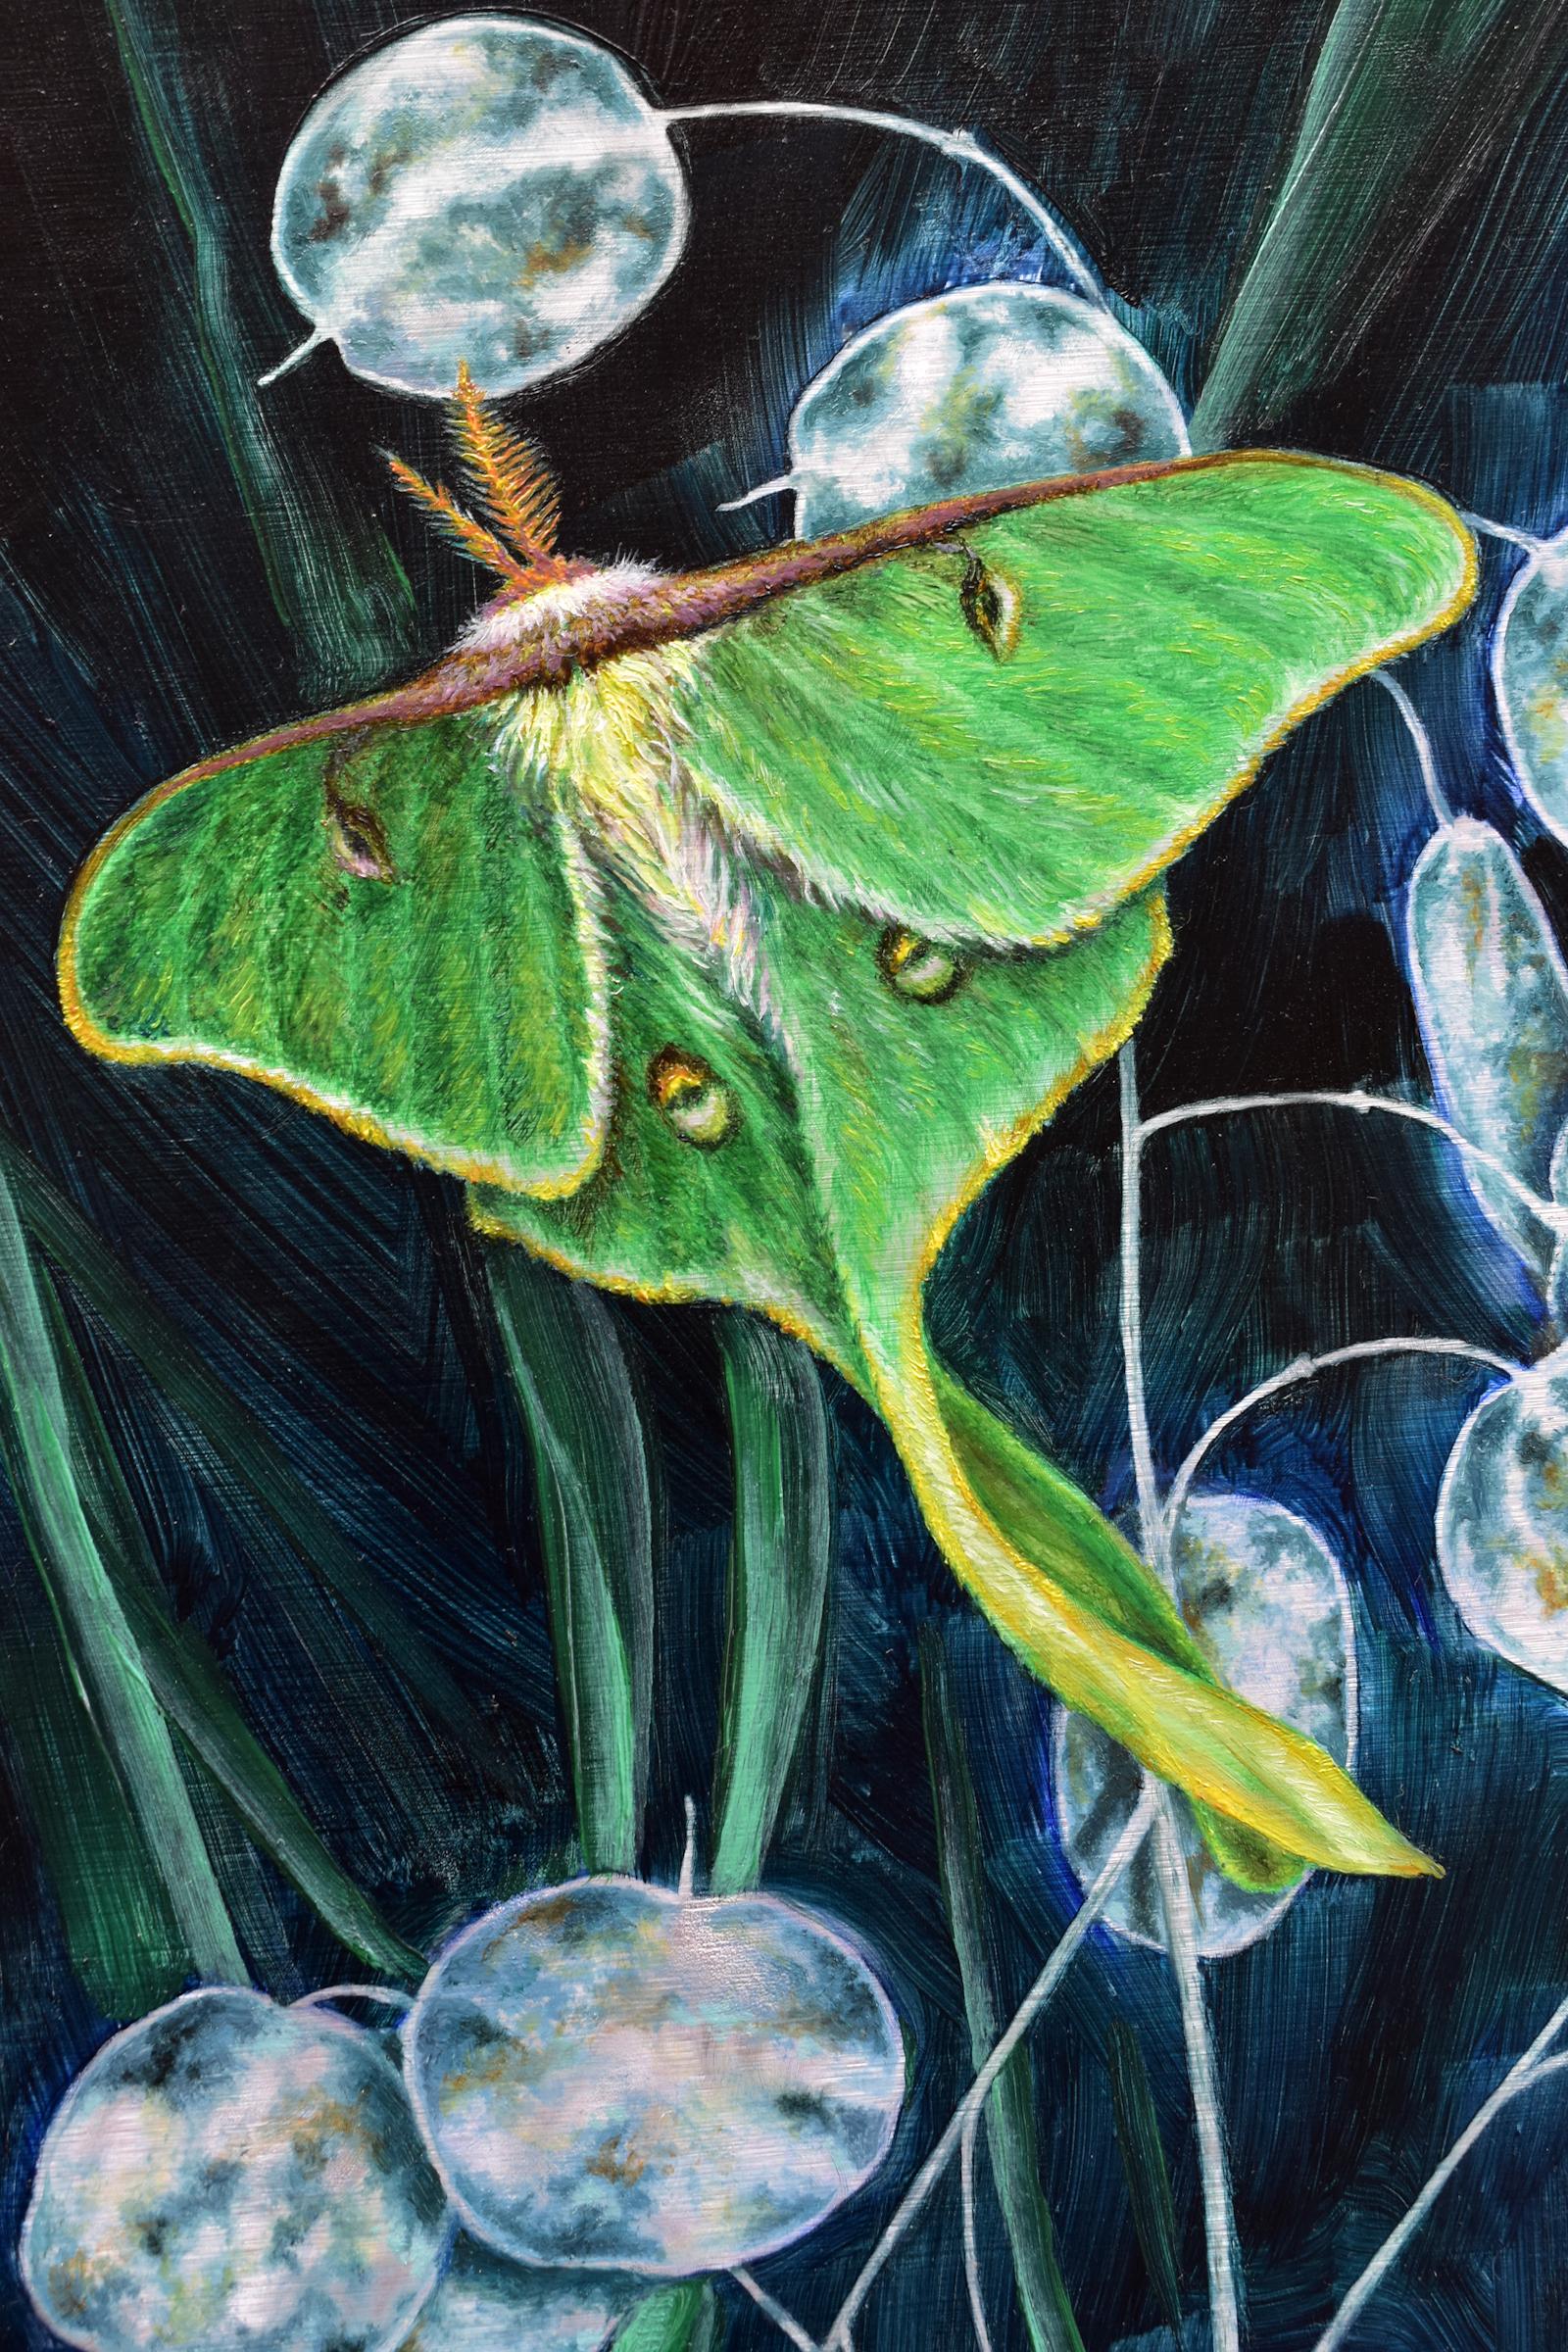 A Week's Worth, Botanical, Insect Painting, Green Luna Moth, Dark Leaves, Cobalt - Contemporary Art by Francine Fox